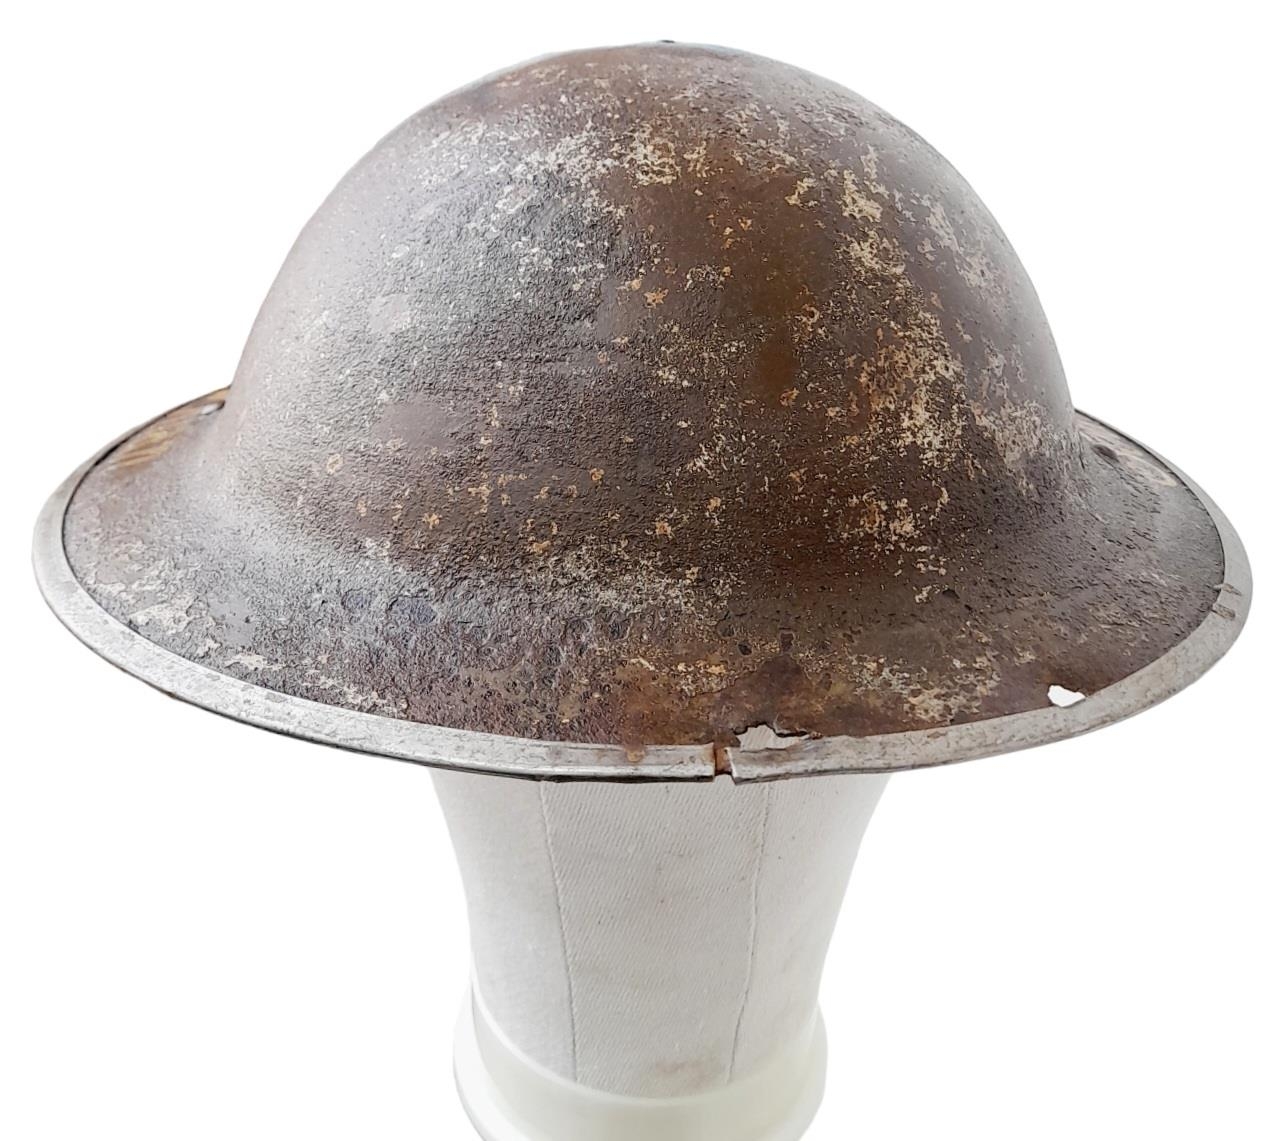 WW2 Trench Art South African Mk II Helmet “From Tobruk to Milan” - Image 3 of 5